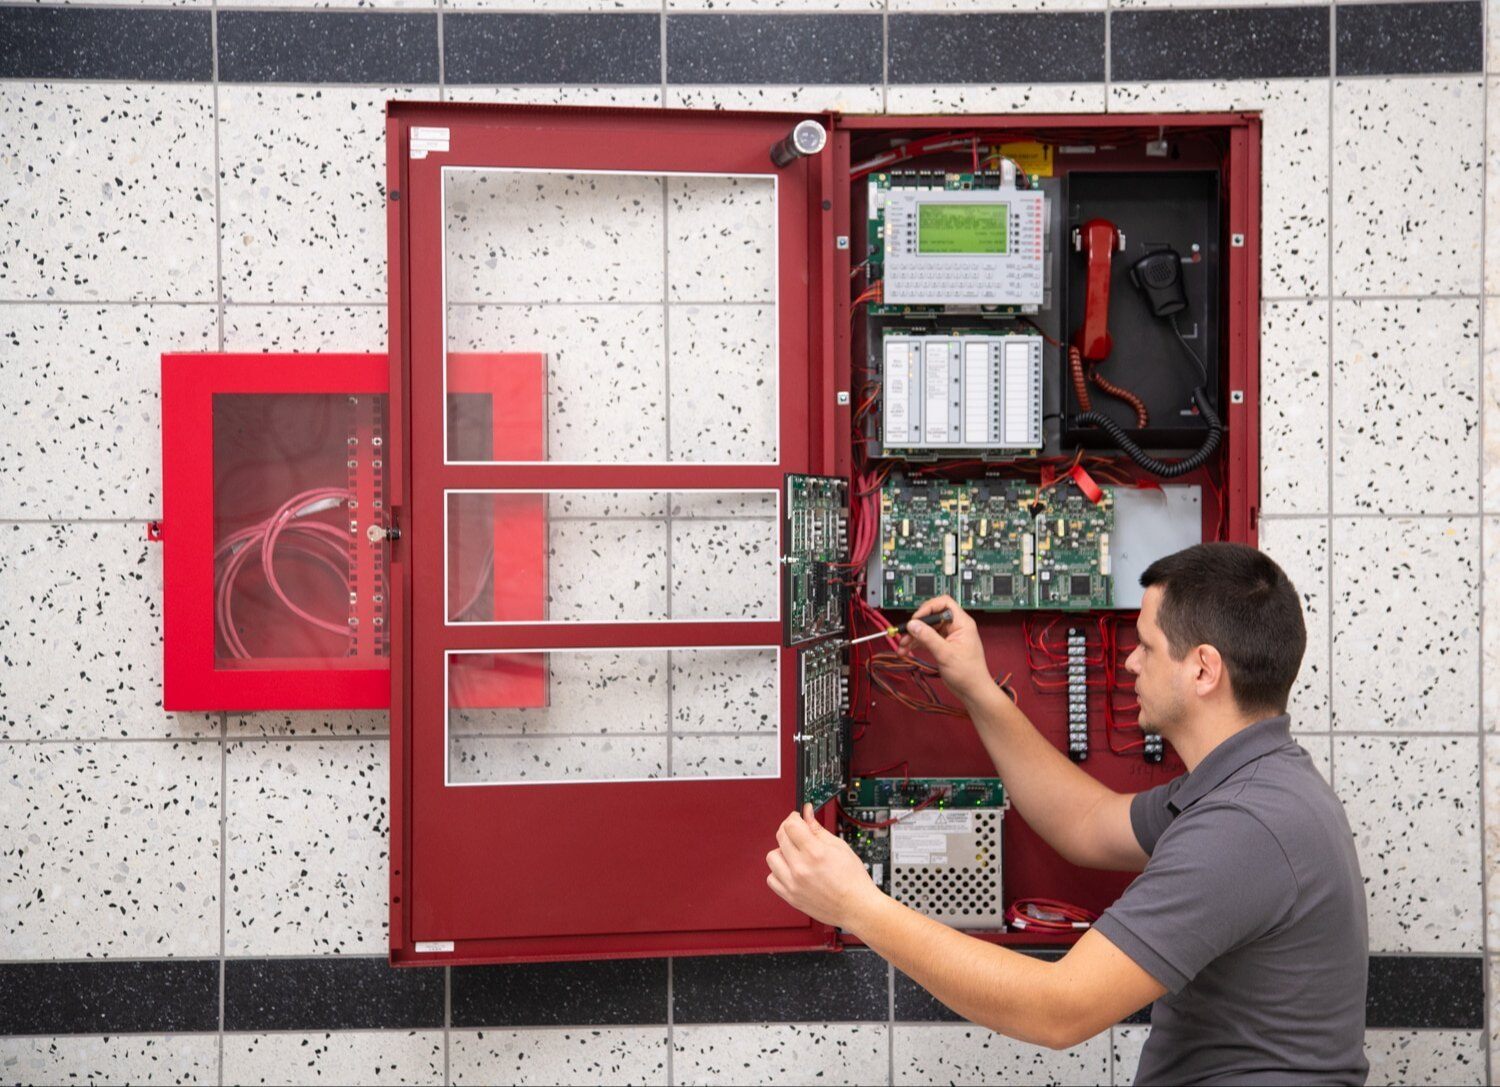 What Are The Basic Components Of Fire Detection And Alarm Systems?